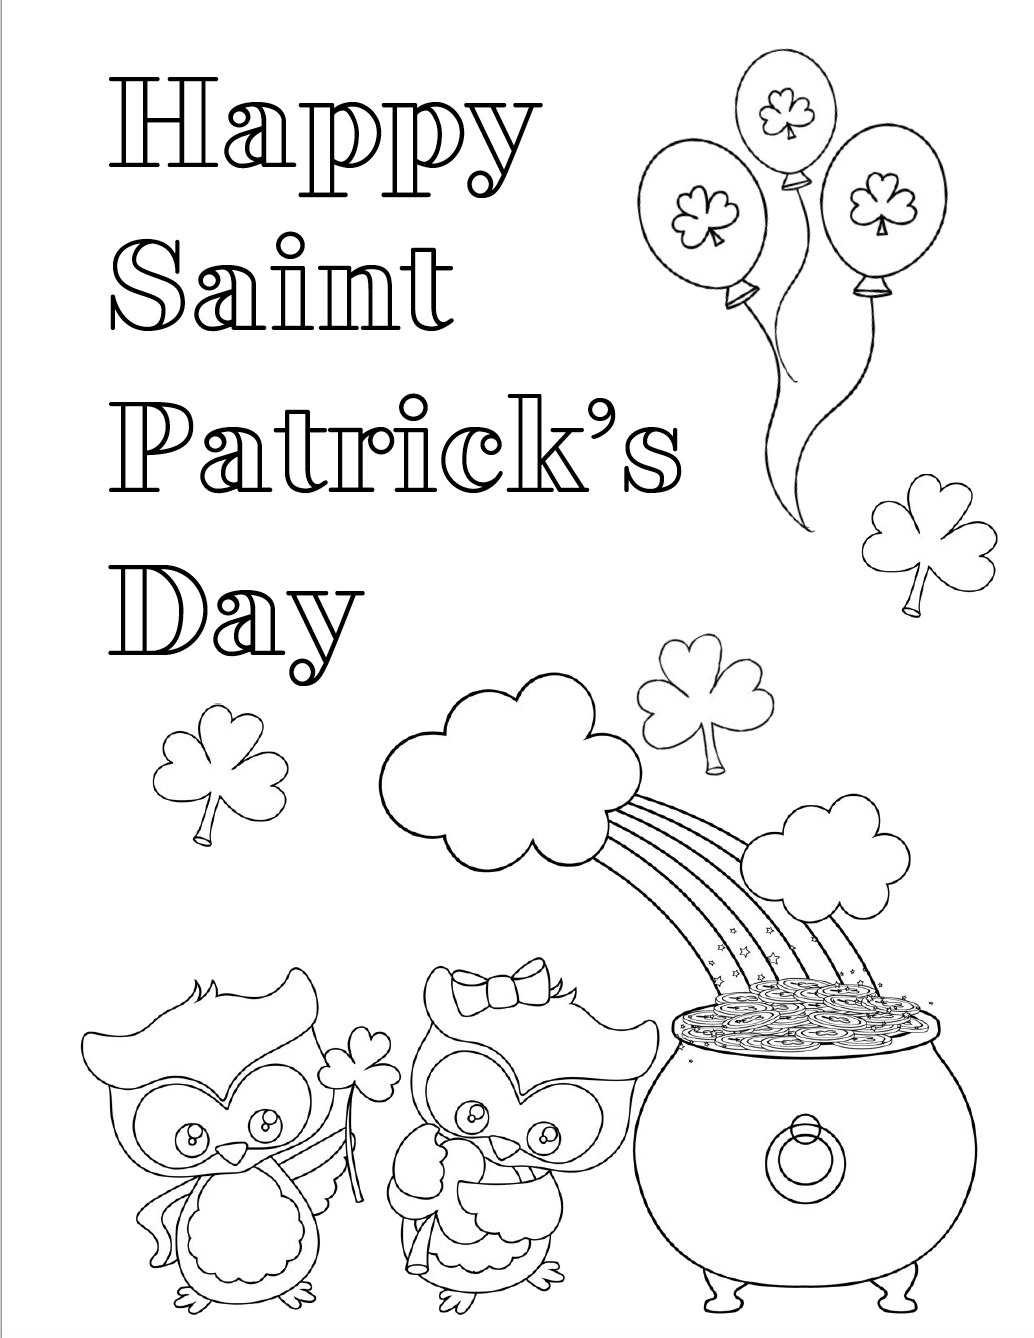 Free Printable St Patrick #39 s Day Images